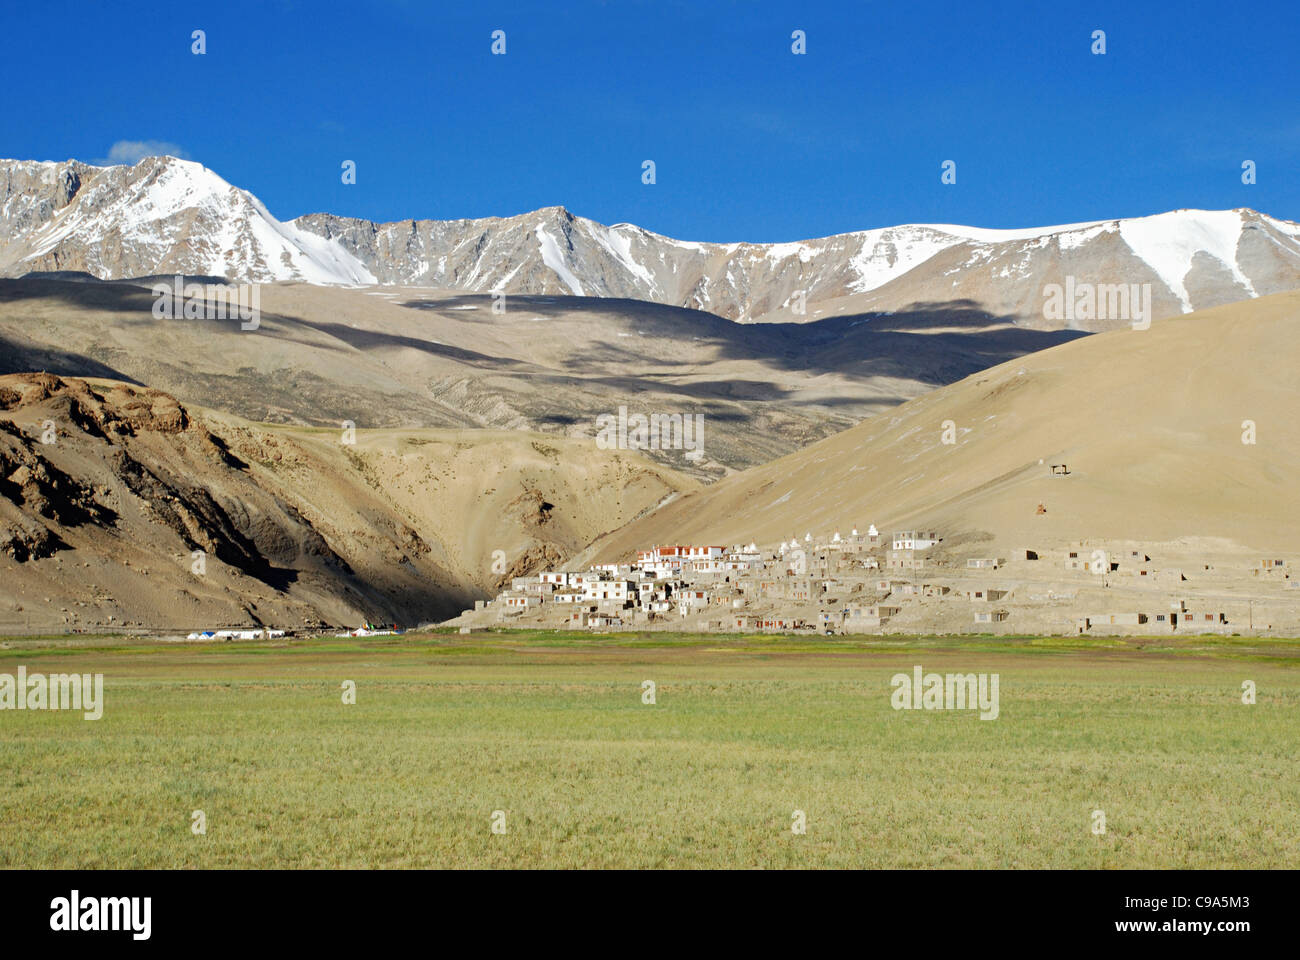 Beautiful composition of houses of Korzok community people against snow clad Himalayan mountains, living around the lake Tsomori Stock Photo